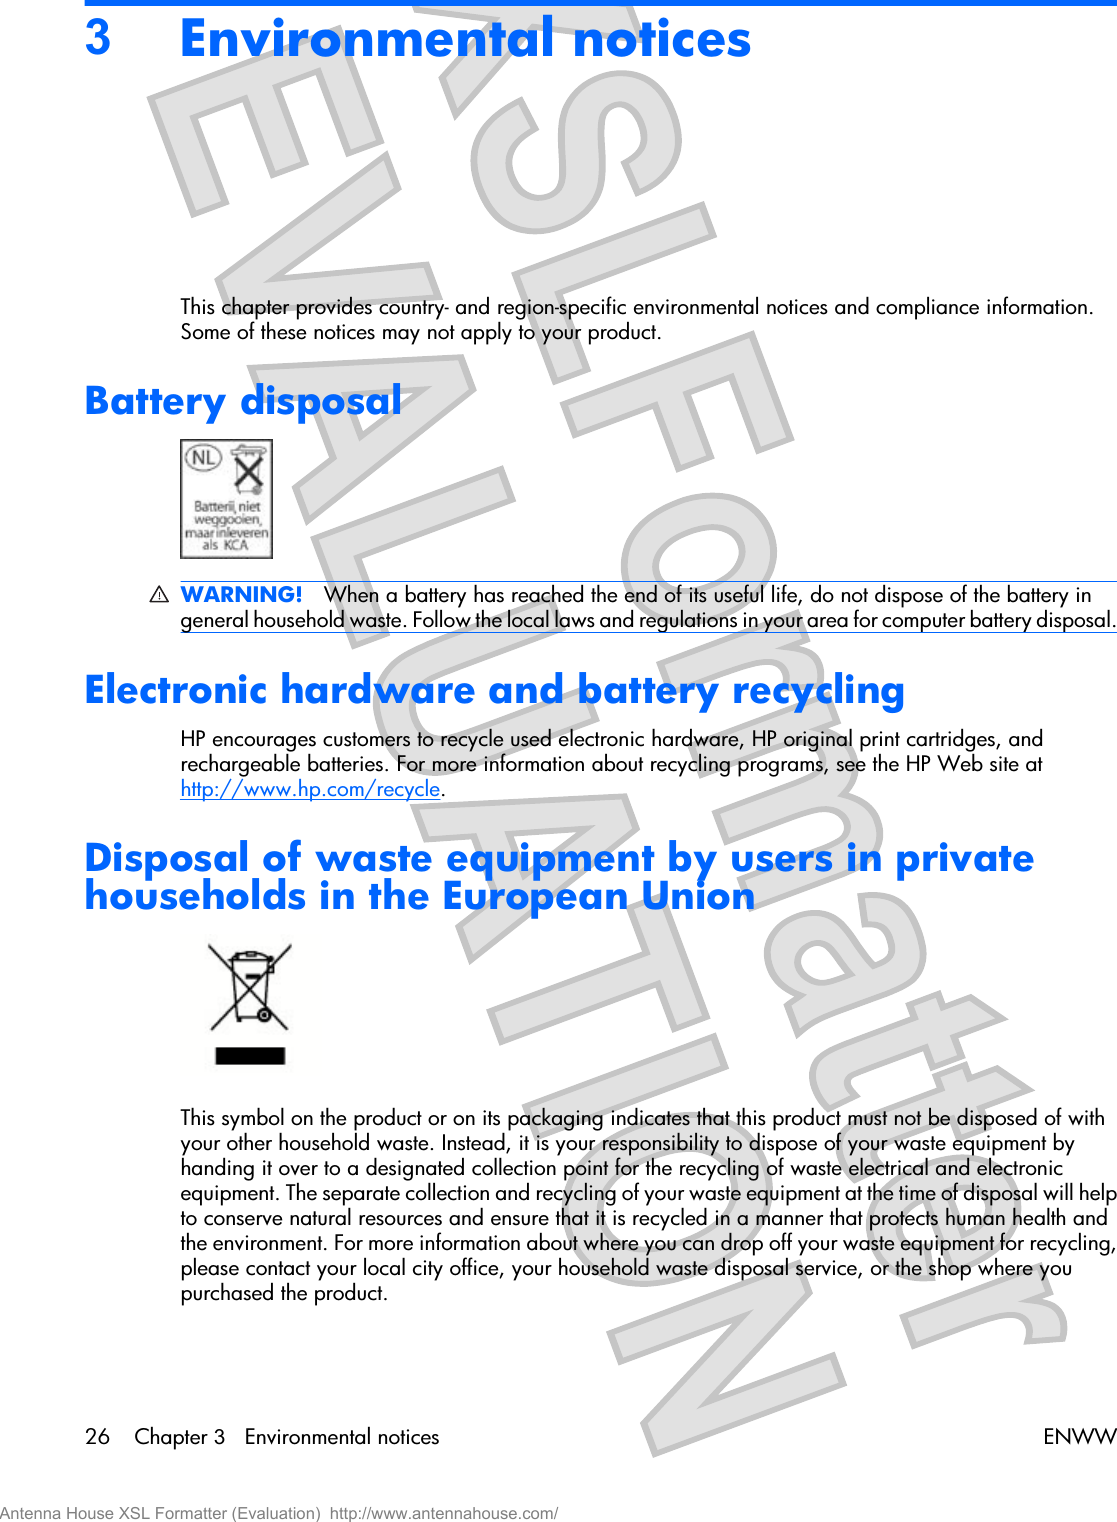 3Environmental noticesThis chapter provides country- and region-specific environmental notices and compliance information.Some of these notices may not apply to your product.Battery disposalWARNING! When a battery has reached the end of its useful life, do not dispose of the battery ingeneral household waste. Follow the local laws and regulations in your area for computer battery disposal.Electronic hardware and battery recyclingHP encourages customers to recycle used electronic hardware, HP original print cartridges, andrechargeable batteries. For more information about recycling programs, see the HP Web site athttp://www.hp.com/recycle.Disposal of waste equipment by users in privatehouseholds in the European UnionThis symbol on the product or on its packaging indicates that this product must not be disposed of withyour other household waste. Instead, it is your responsibility to dispose of your waste equipment byhanding it over to a designated collection point for the recycling of waste electrical and electronicequipment. The separate collection and recycling of your waste equipment at the time of disposal will helpto conserve natural resources and ensure that it is recycled in a manner that protects human health andthe environment. For more information about where you can drop off your waste equipment for recycling,please contact your local city office, your household waste disposal service, or the shop where youpurchased the product.26 Chapter 3   Environmental notices ENWWAntenna House XSL Formatter (Evaluation)  http://www.antennahouse.com/